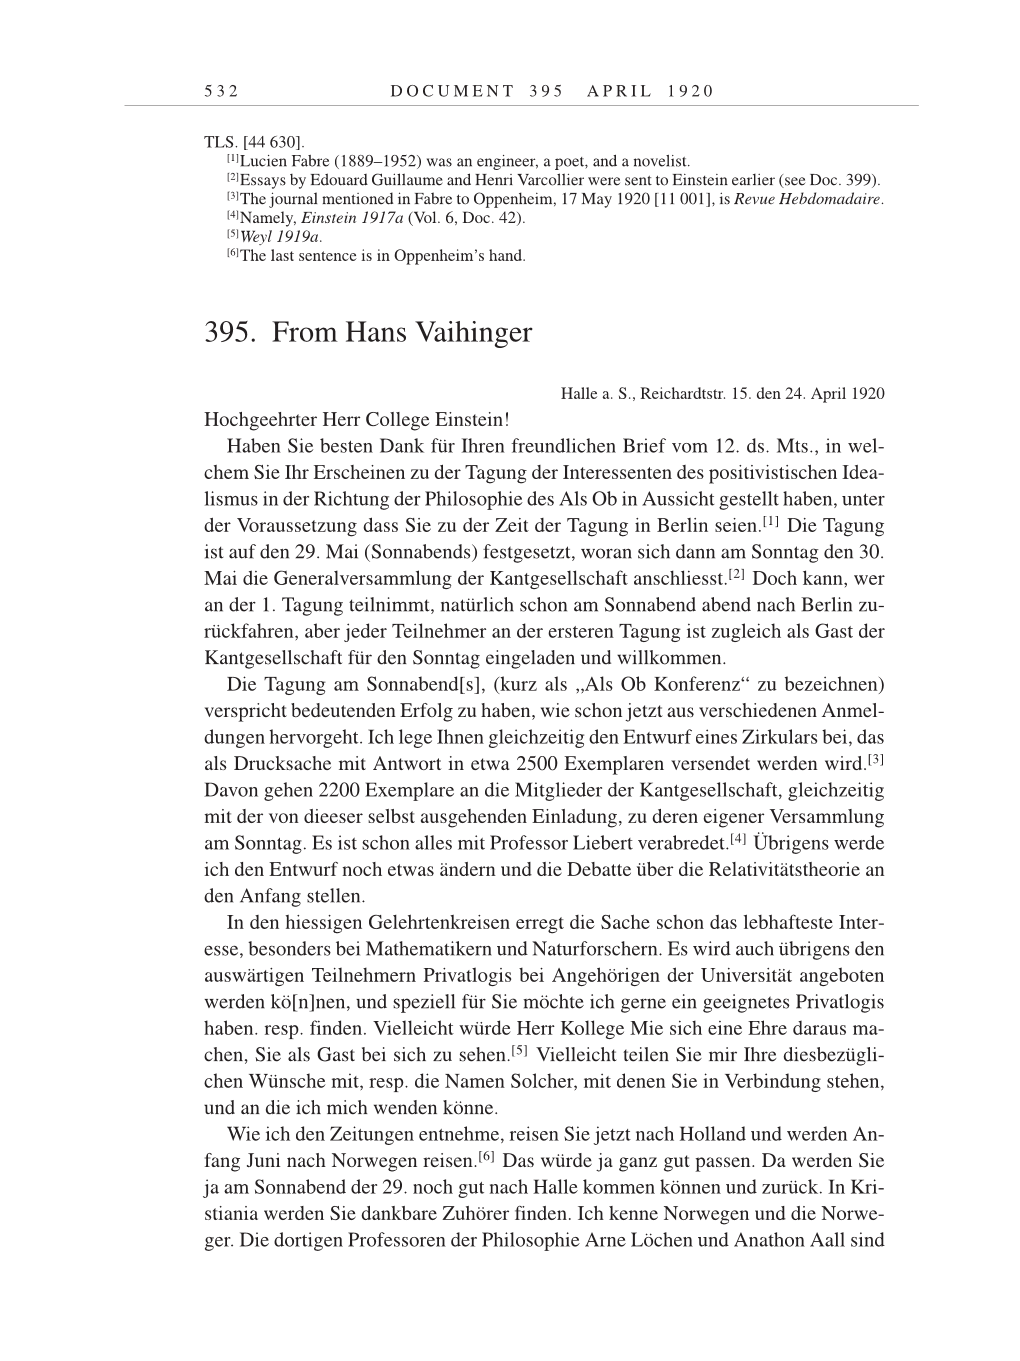 Volume 9: The Berlin Years: Correspondence January 1919-April 1920 page 532